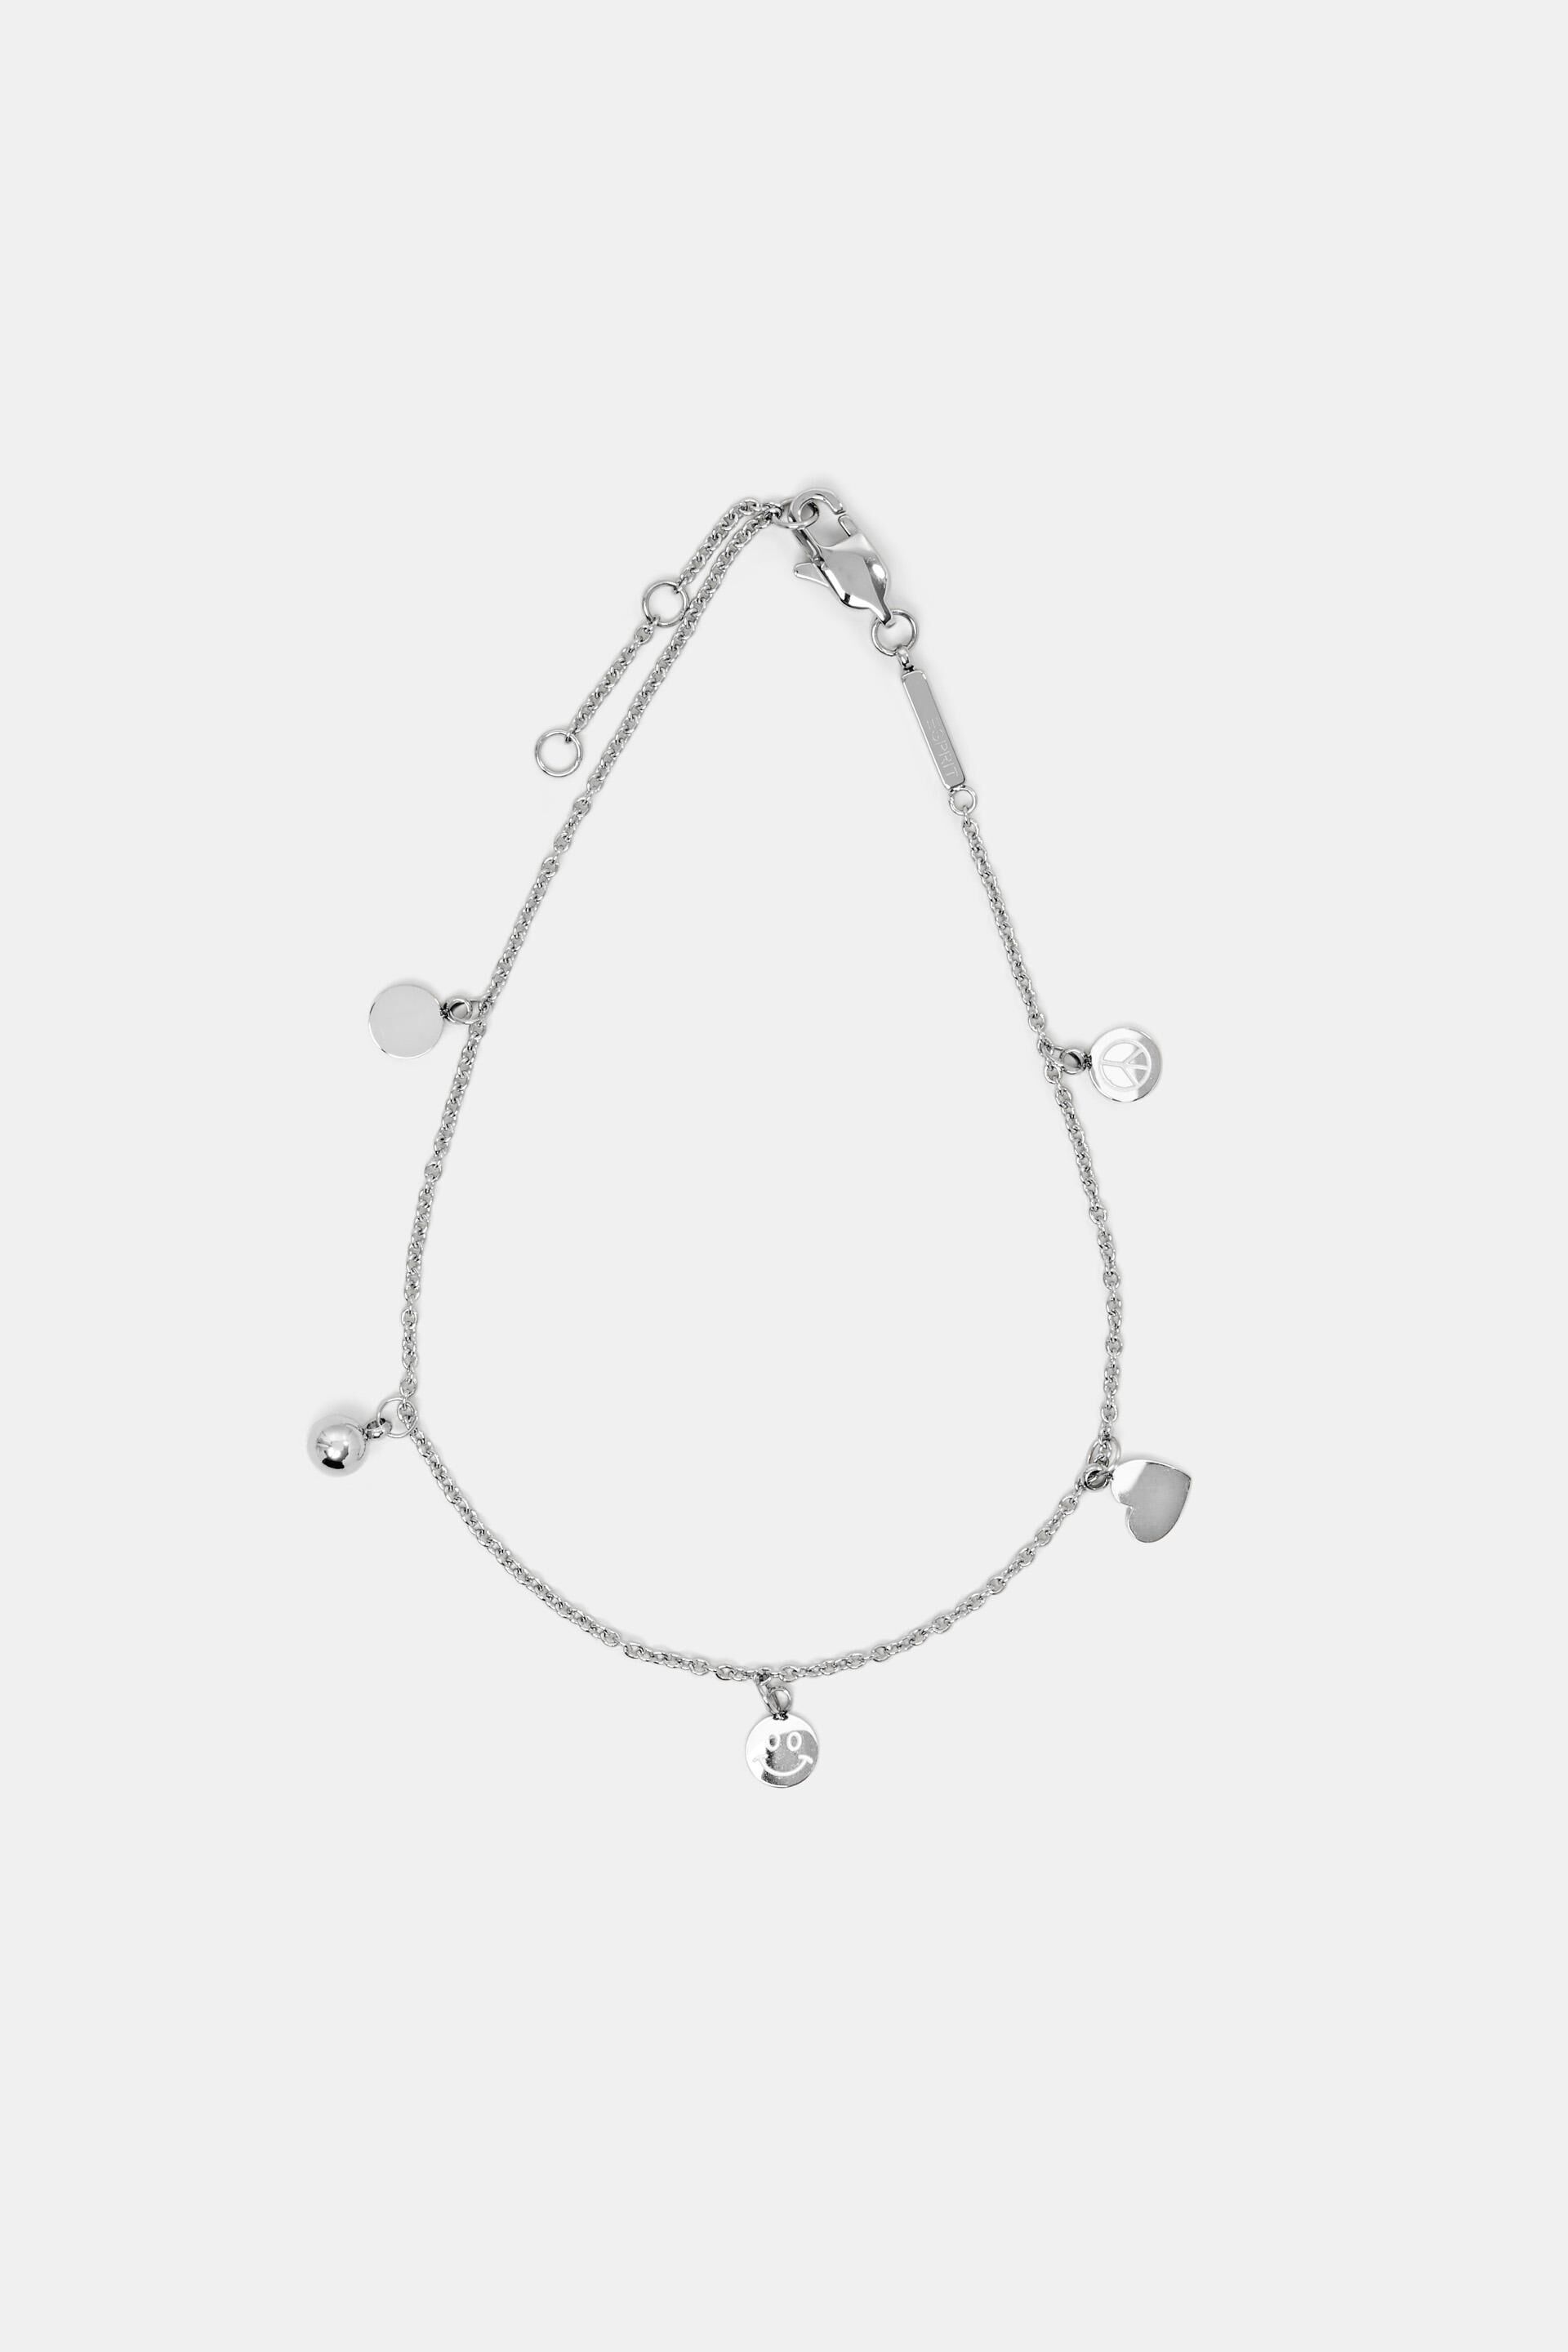 Esprit Lucky anklet, steel charms stainless